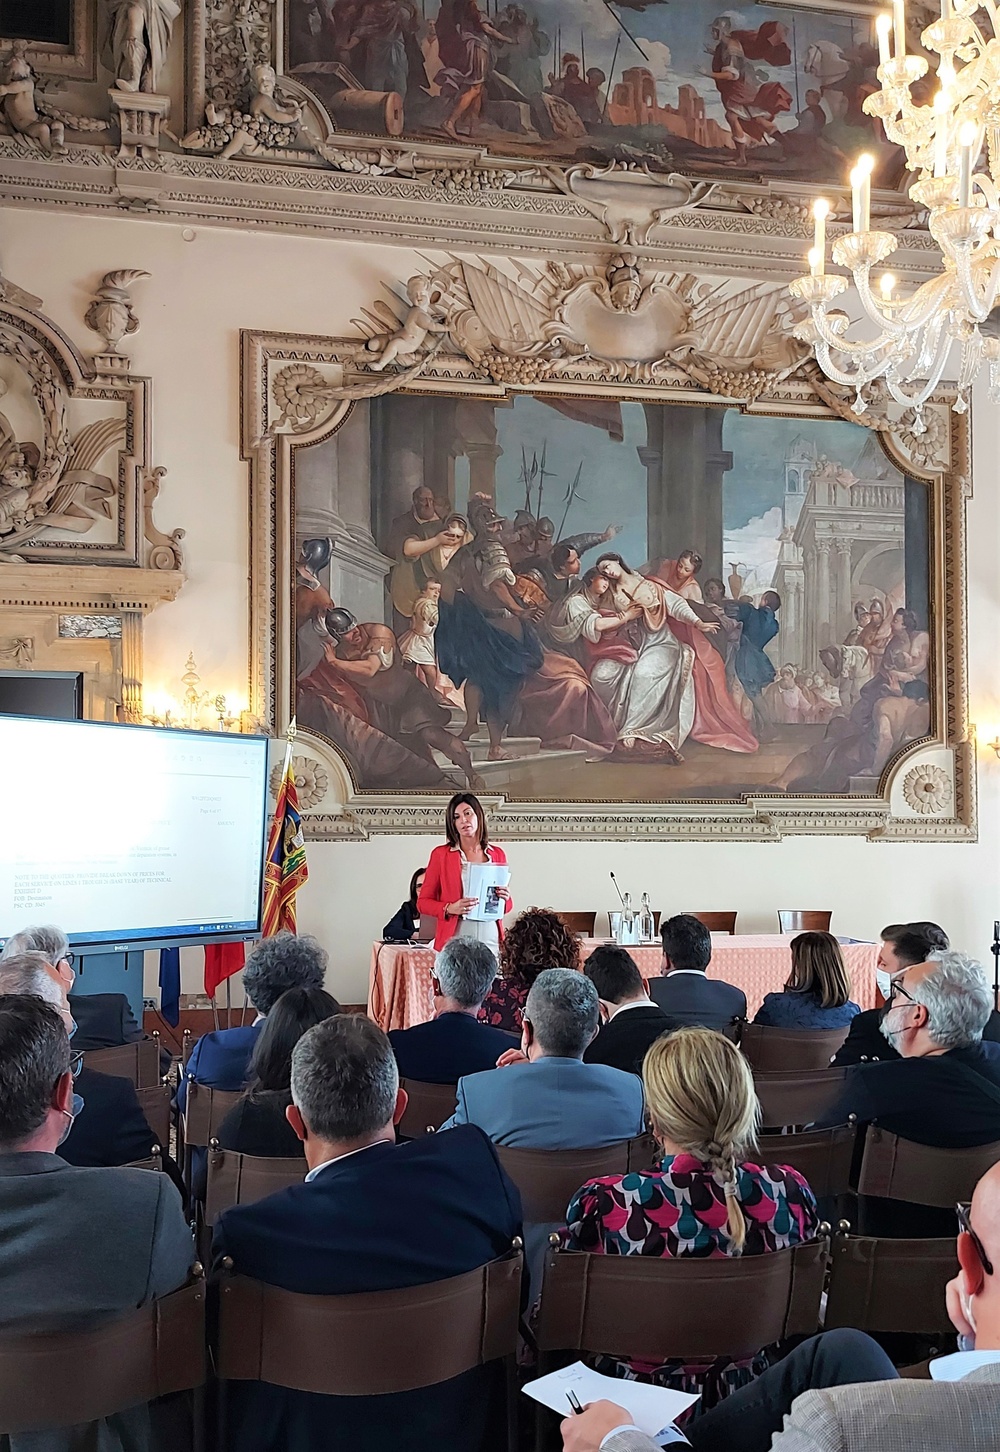 Italian businesses in Vicenza learn about military contracting